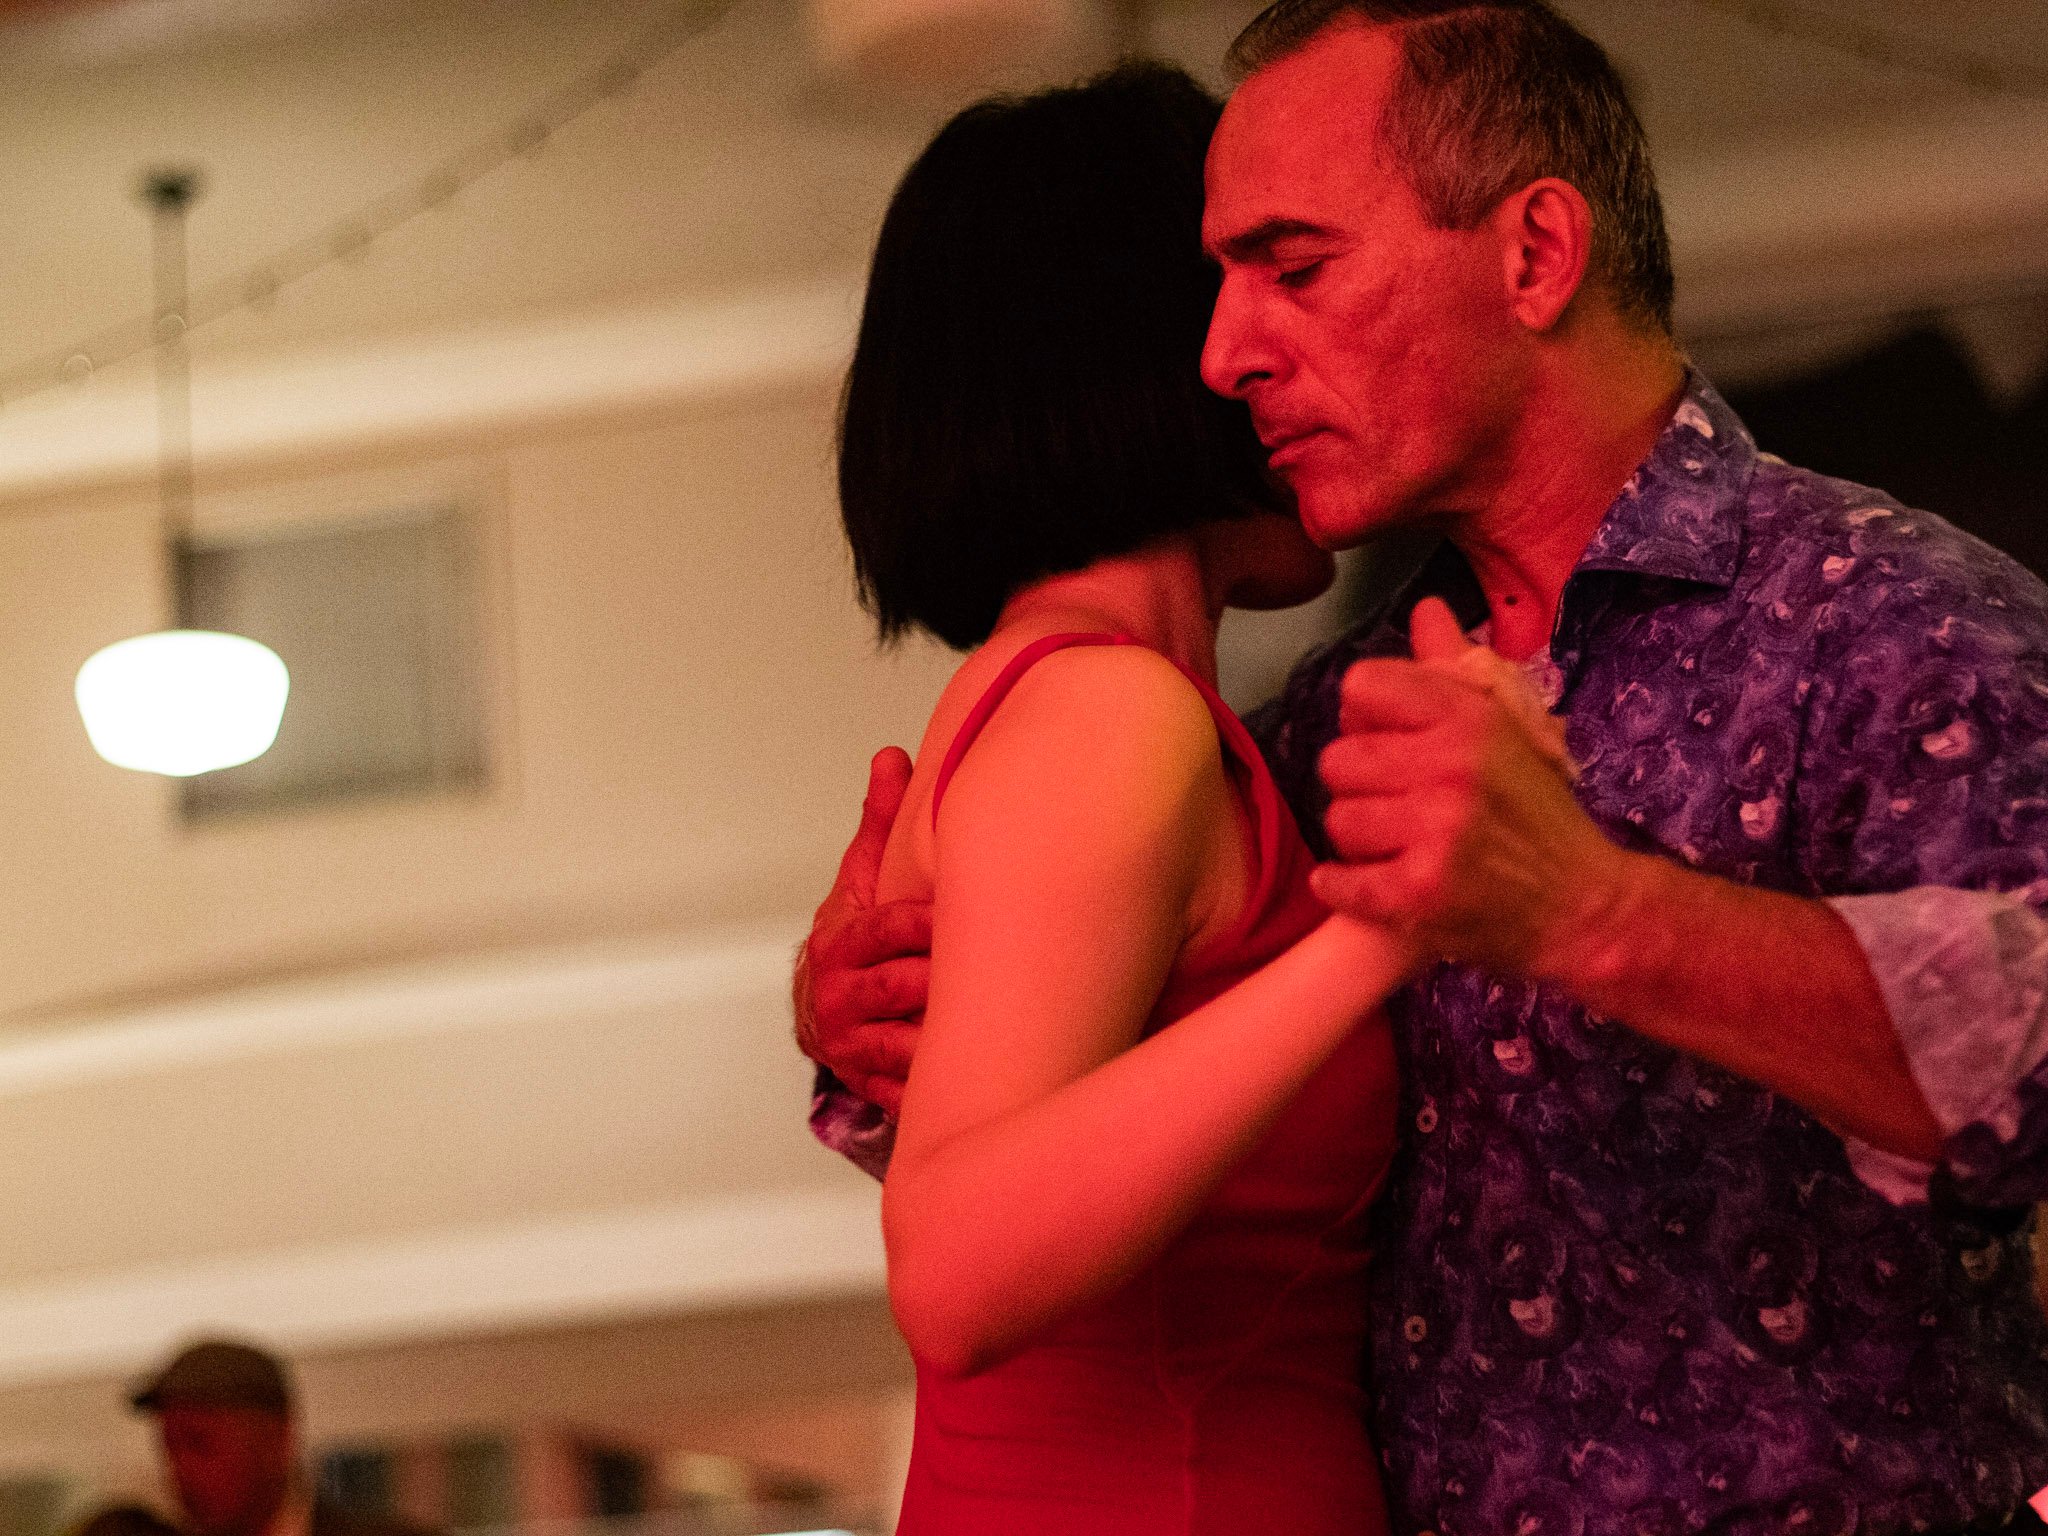 ID: A close-up photograph of a man and a woman dancing. The woman’s face is hidden behind the man’s face, his eyes are closed as their chests are pressed together and their hands clasped.